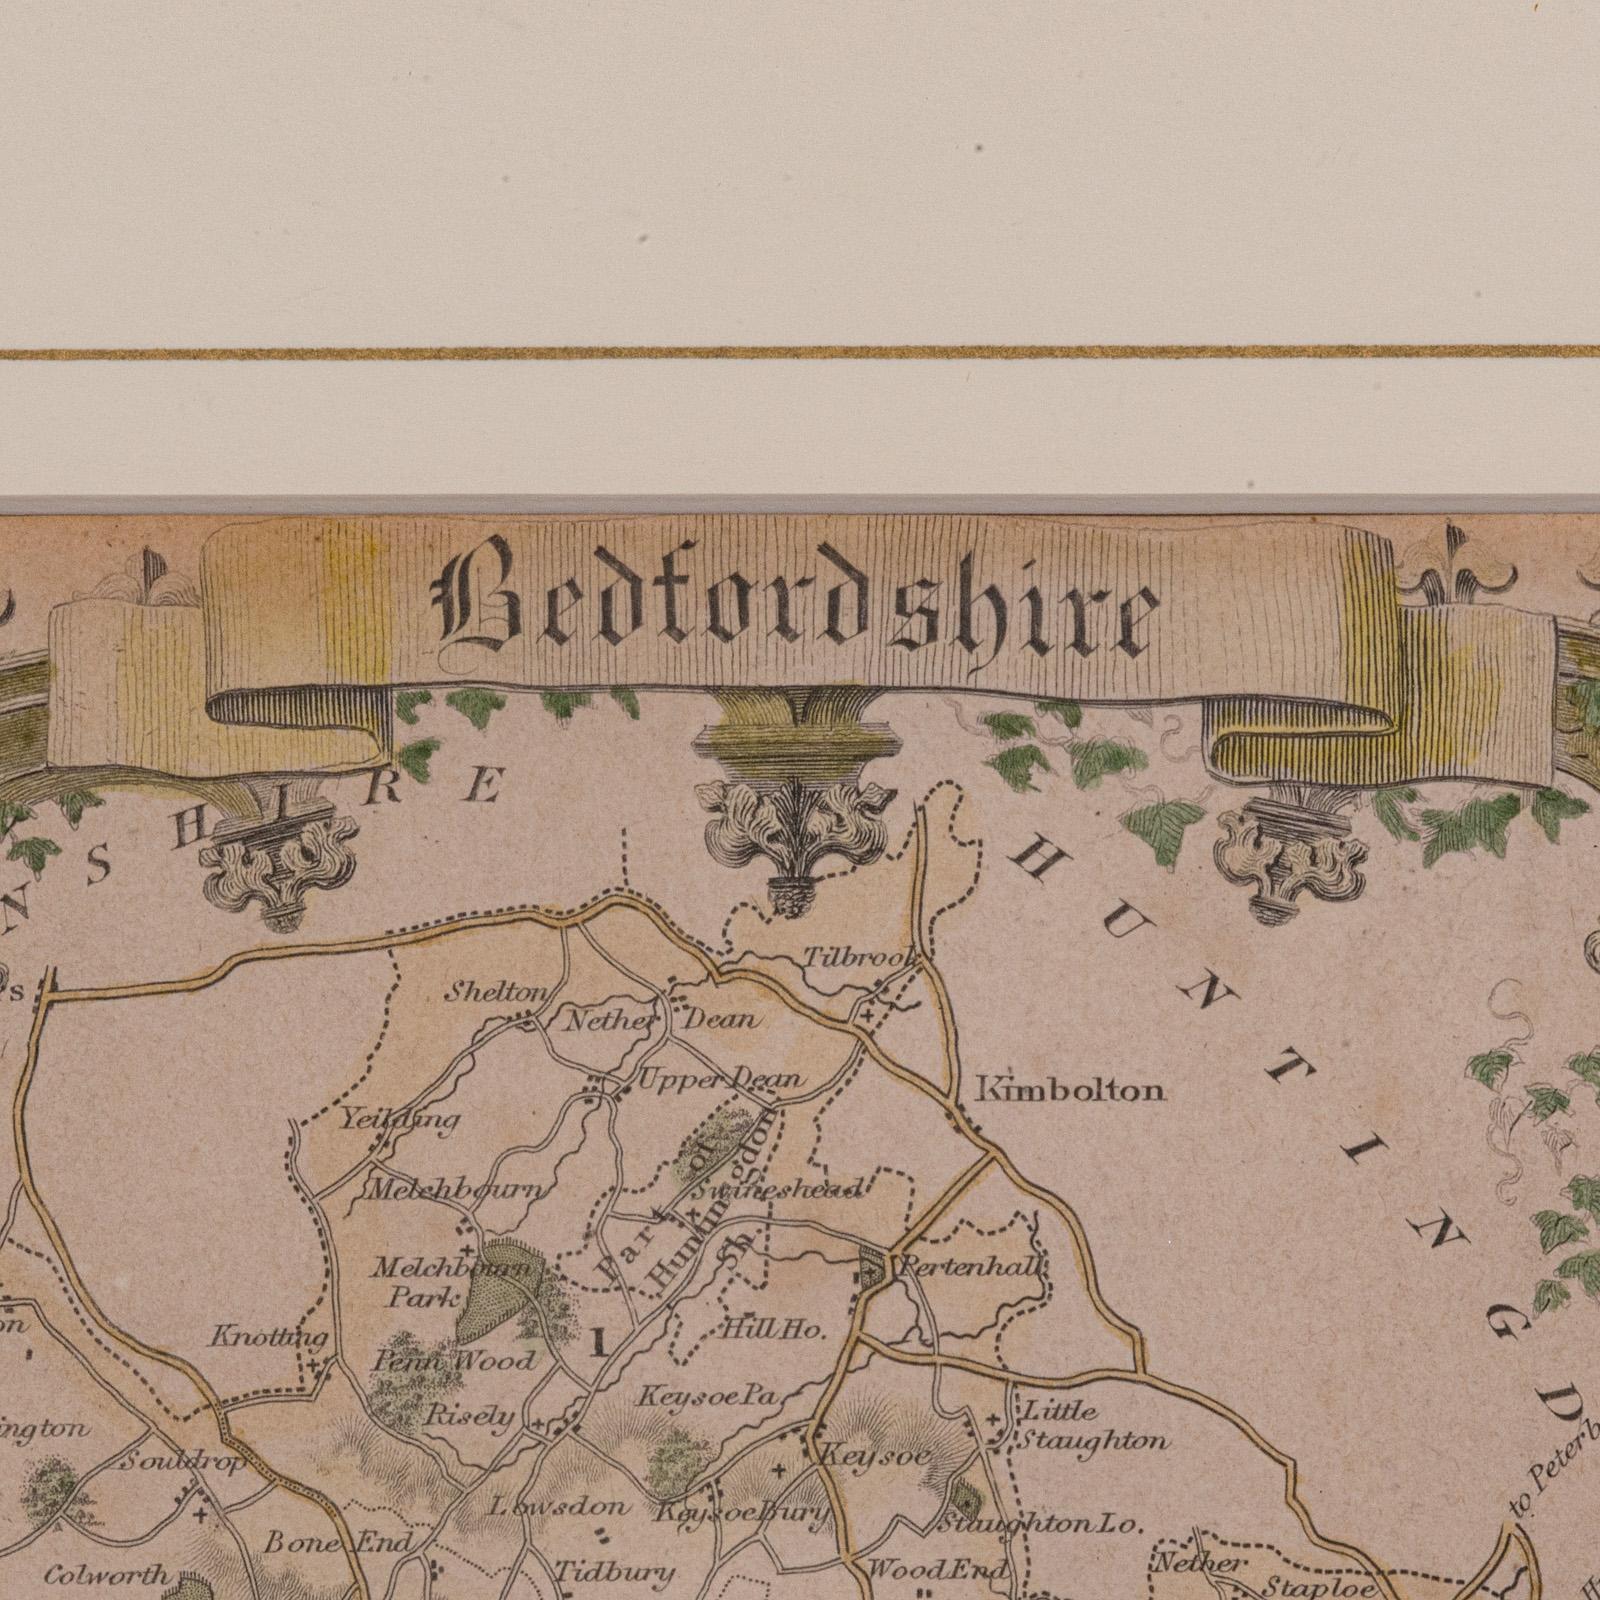 Wood Antique Lithography Map, Bedfordshire, English, Framed Engraving, Cartography For Sale